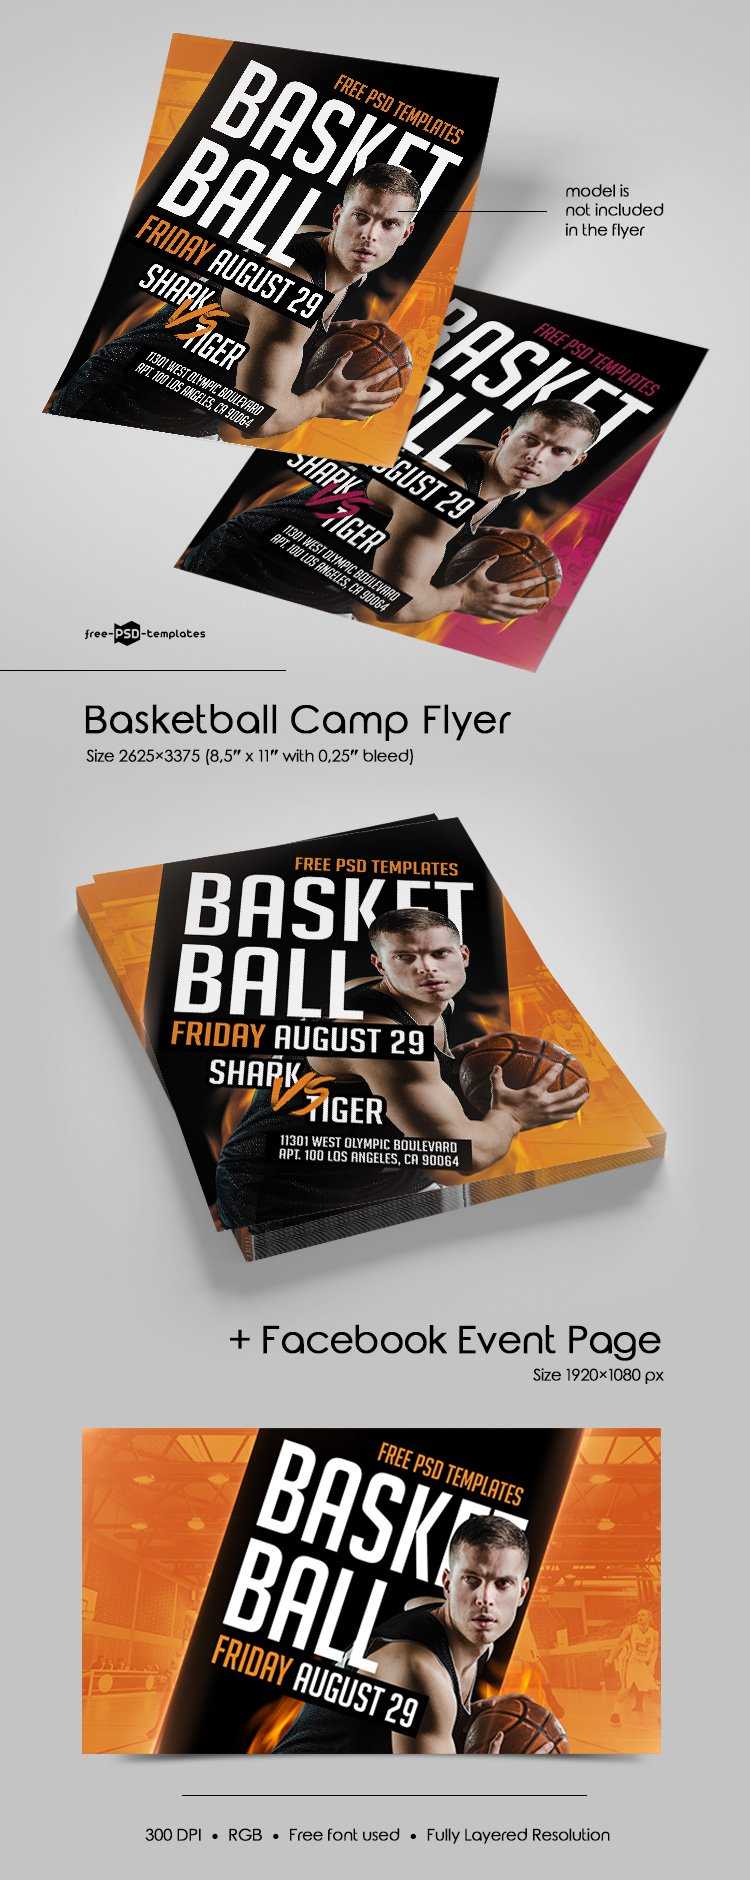 Free Basketball Camp Flyer In Psd | Free Psd Templates For Basketball Camp Brochure Template